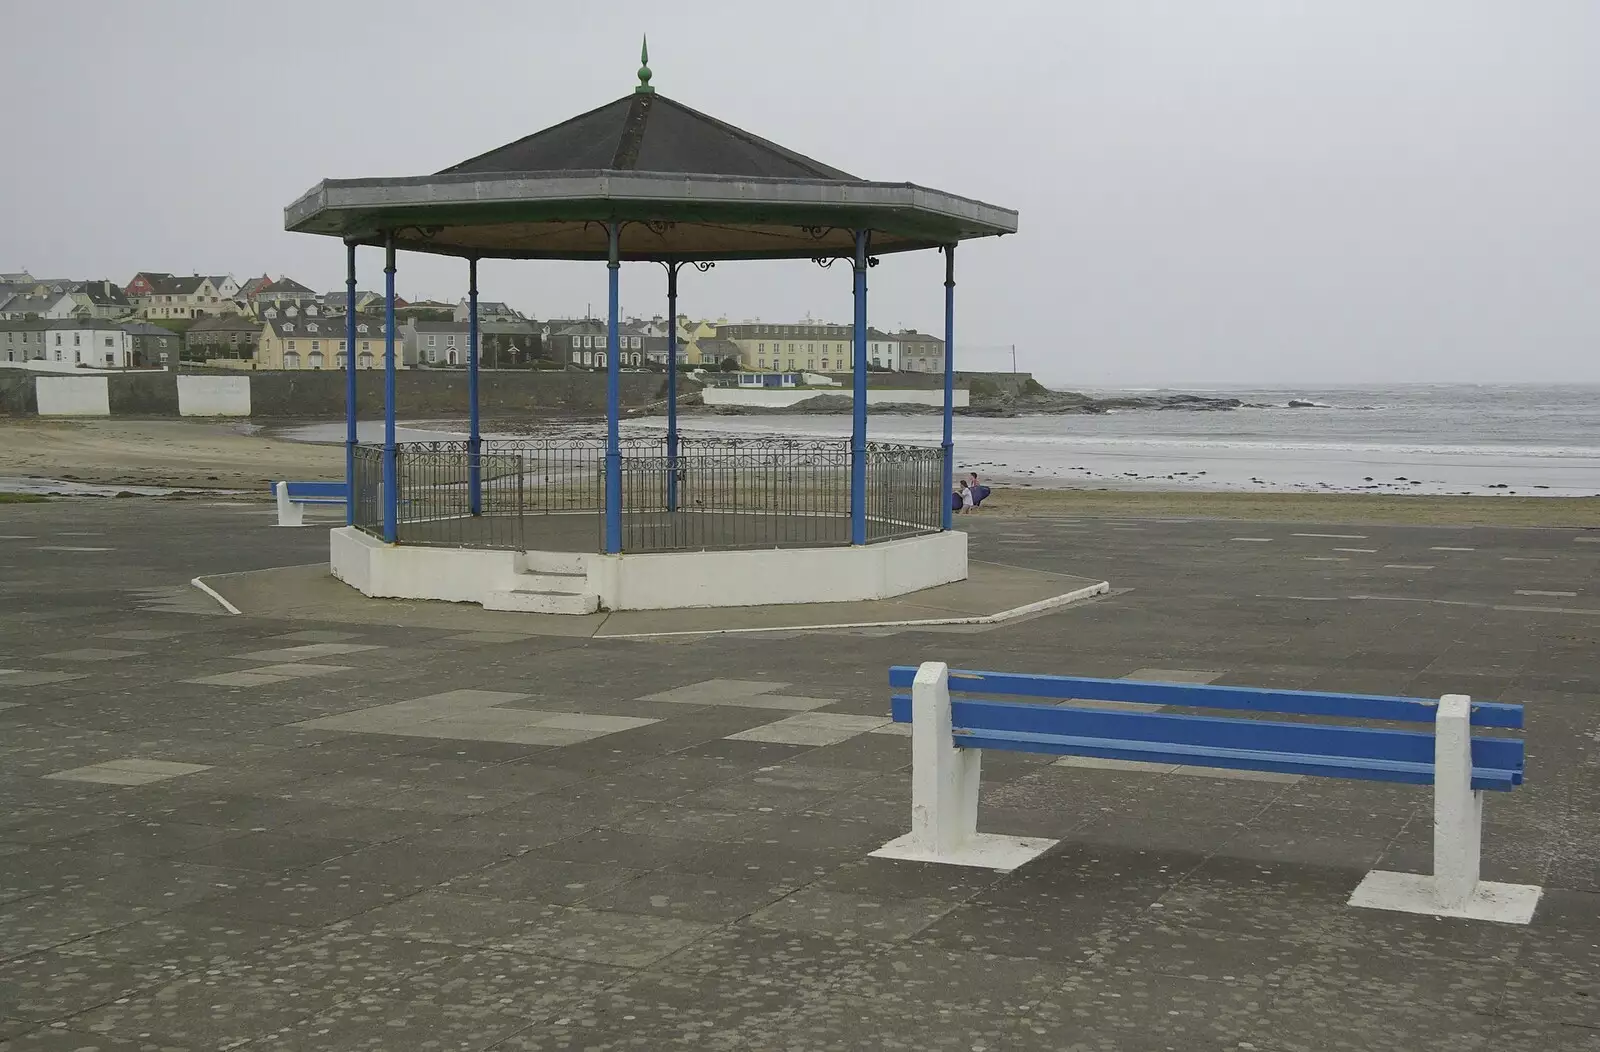 An empty band stand, from 30th Birthday Party in Kilkee, County Clare, Ireland - 22nd September 2007